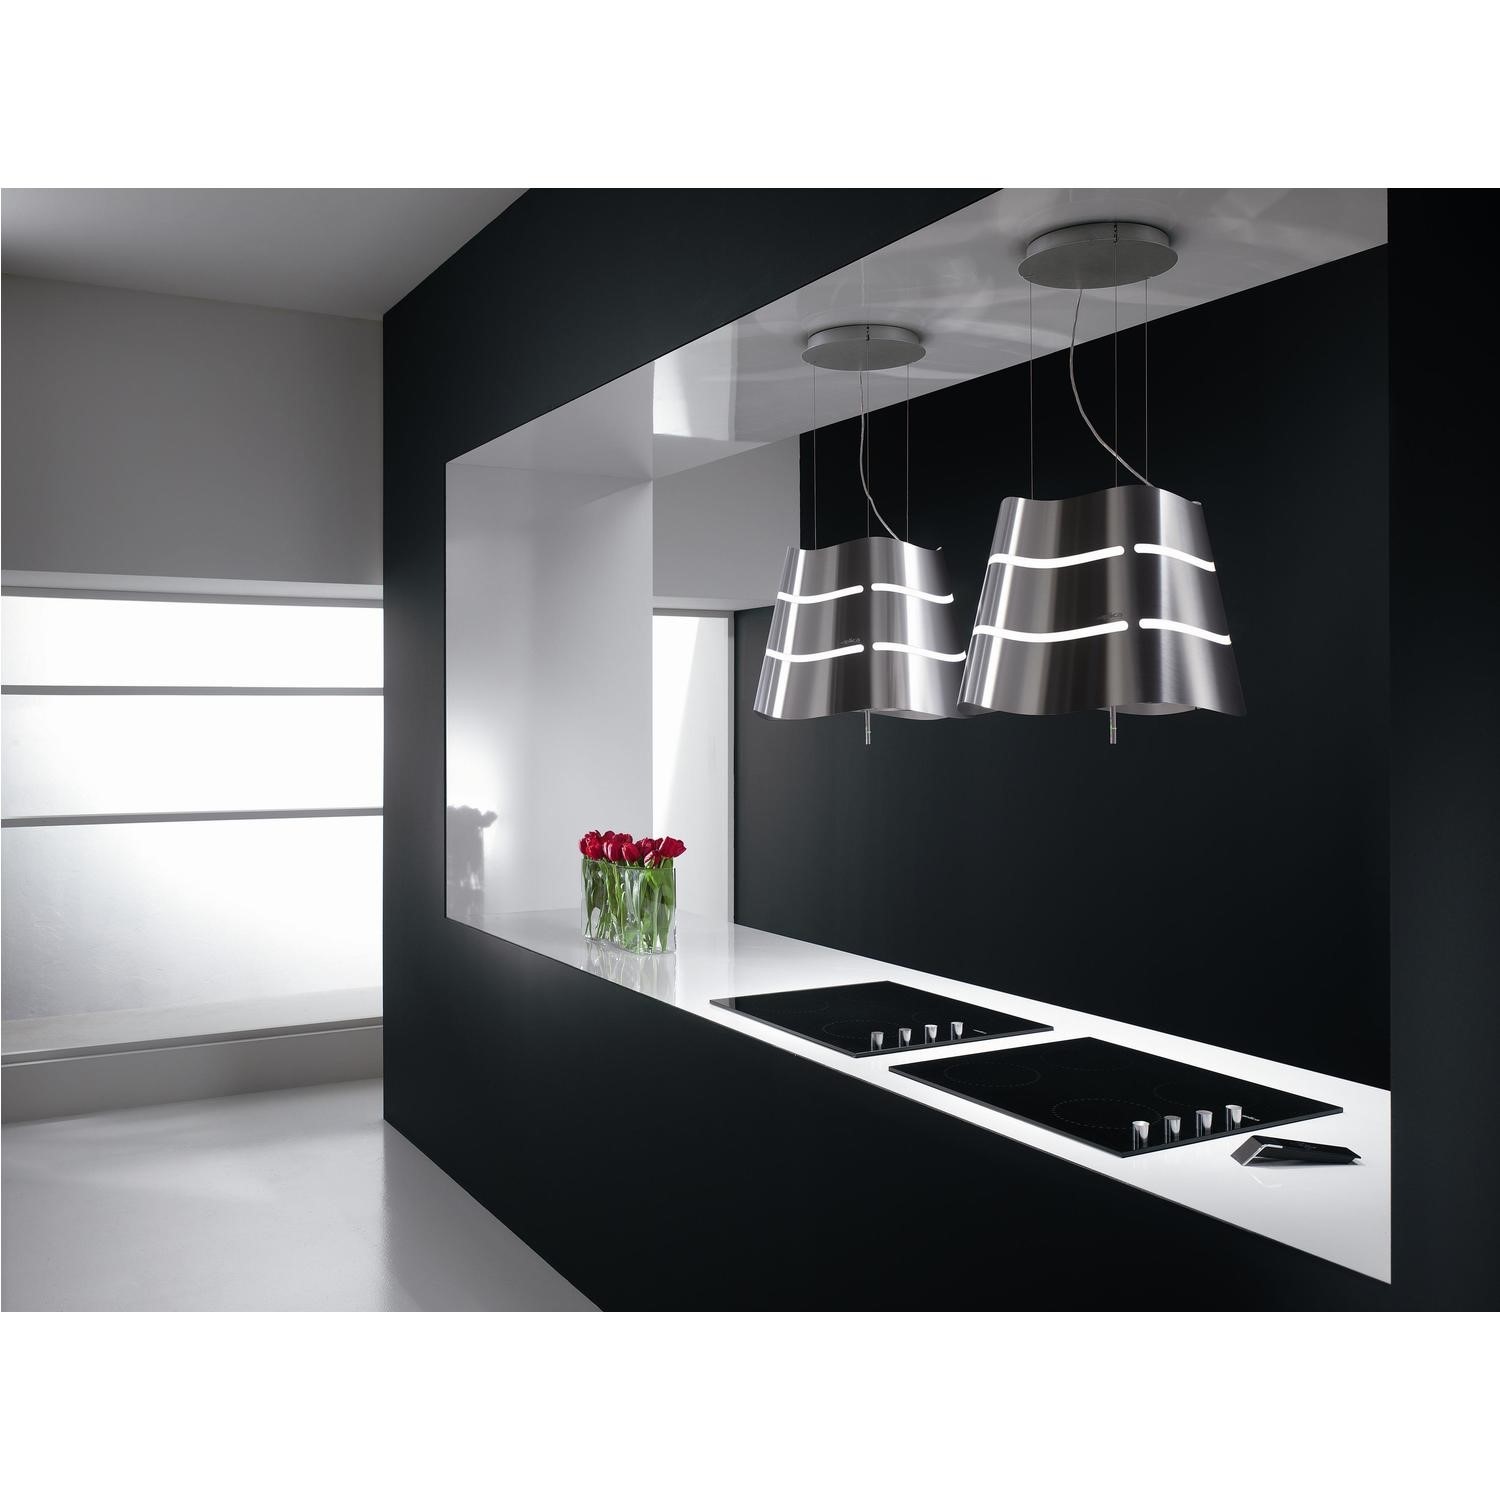 90 Elica Flow Flow Ceiling Mounted Decorative Island Cooker